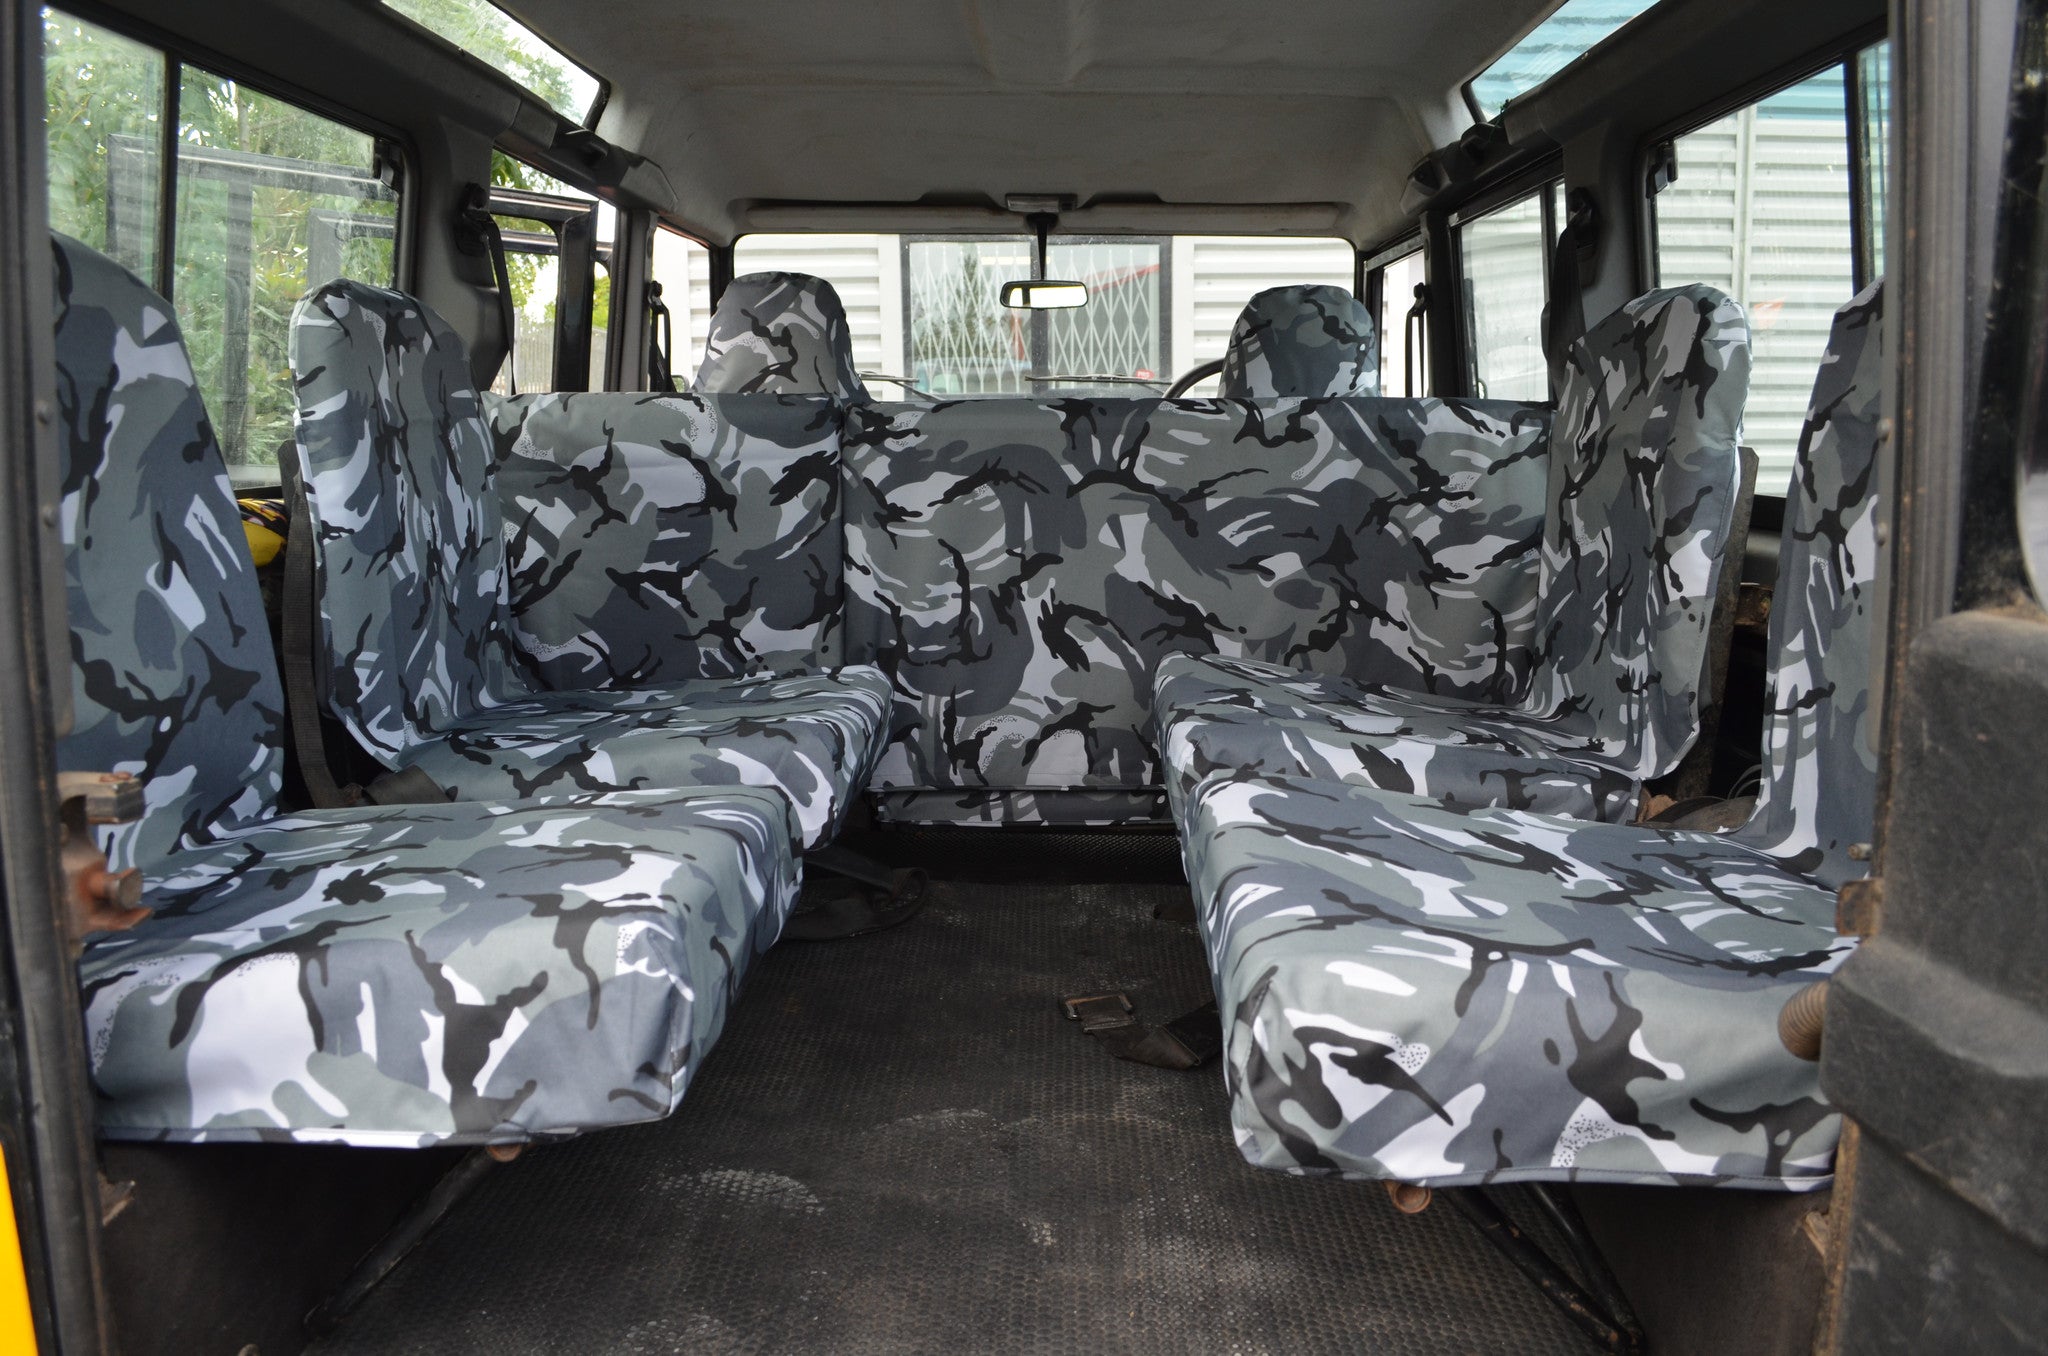 Land Rover Defender 1983 - 2007 Rear Seat Covers Set of 4 Dicky Seats / Grey Camouflage Turtle Covers Ltd